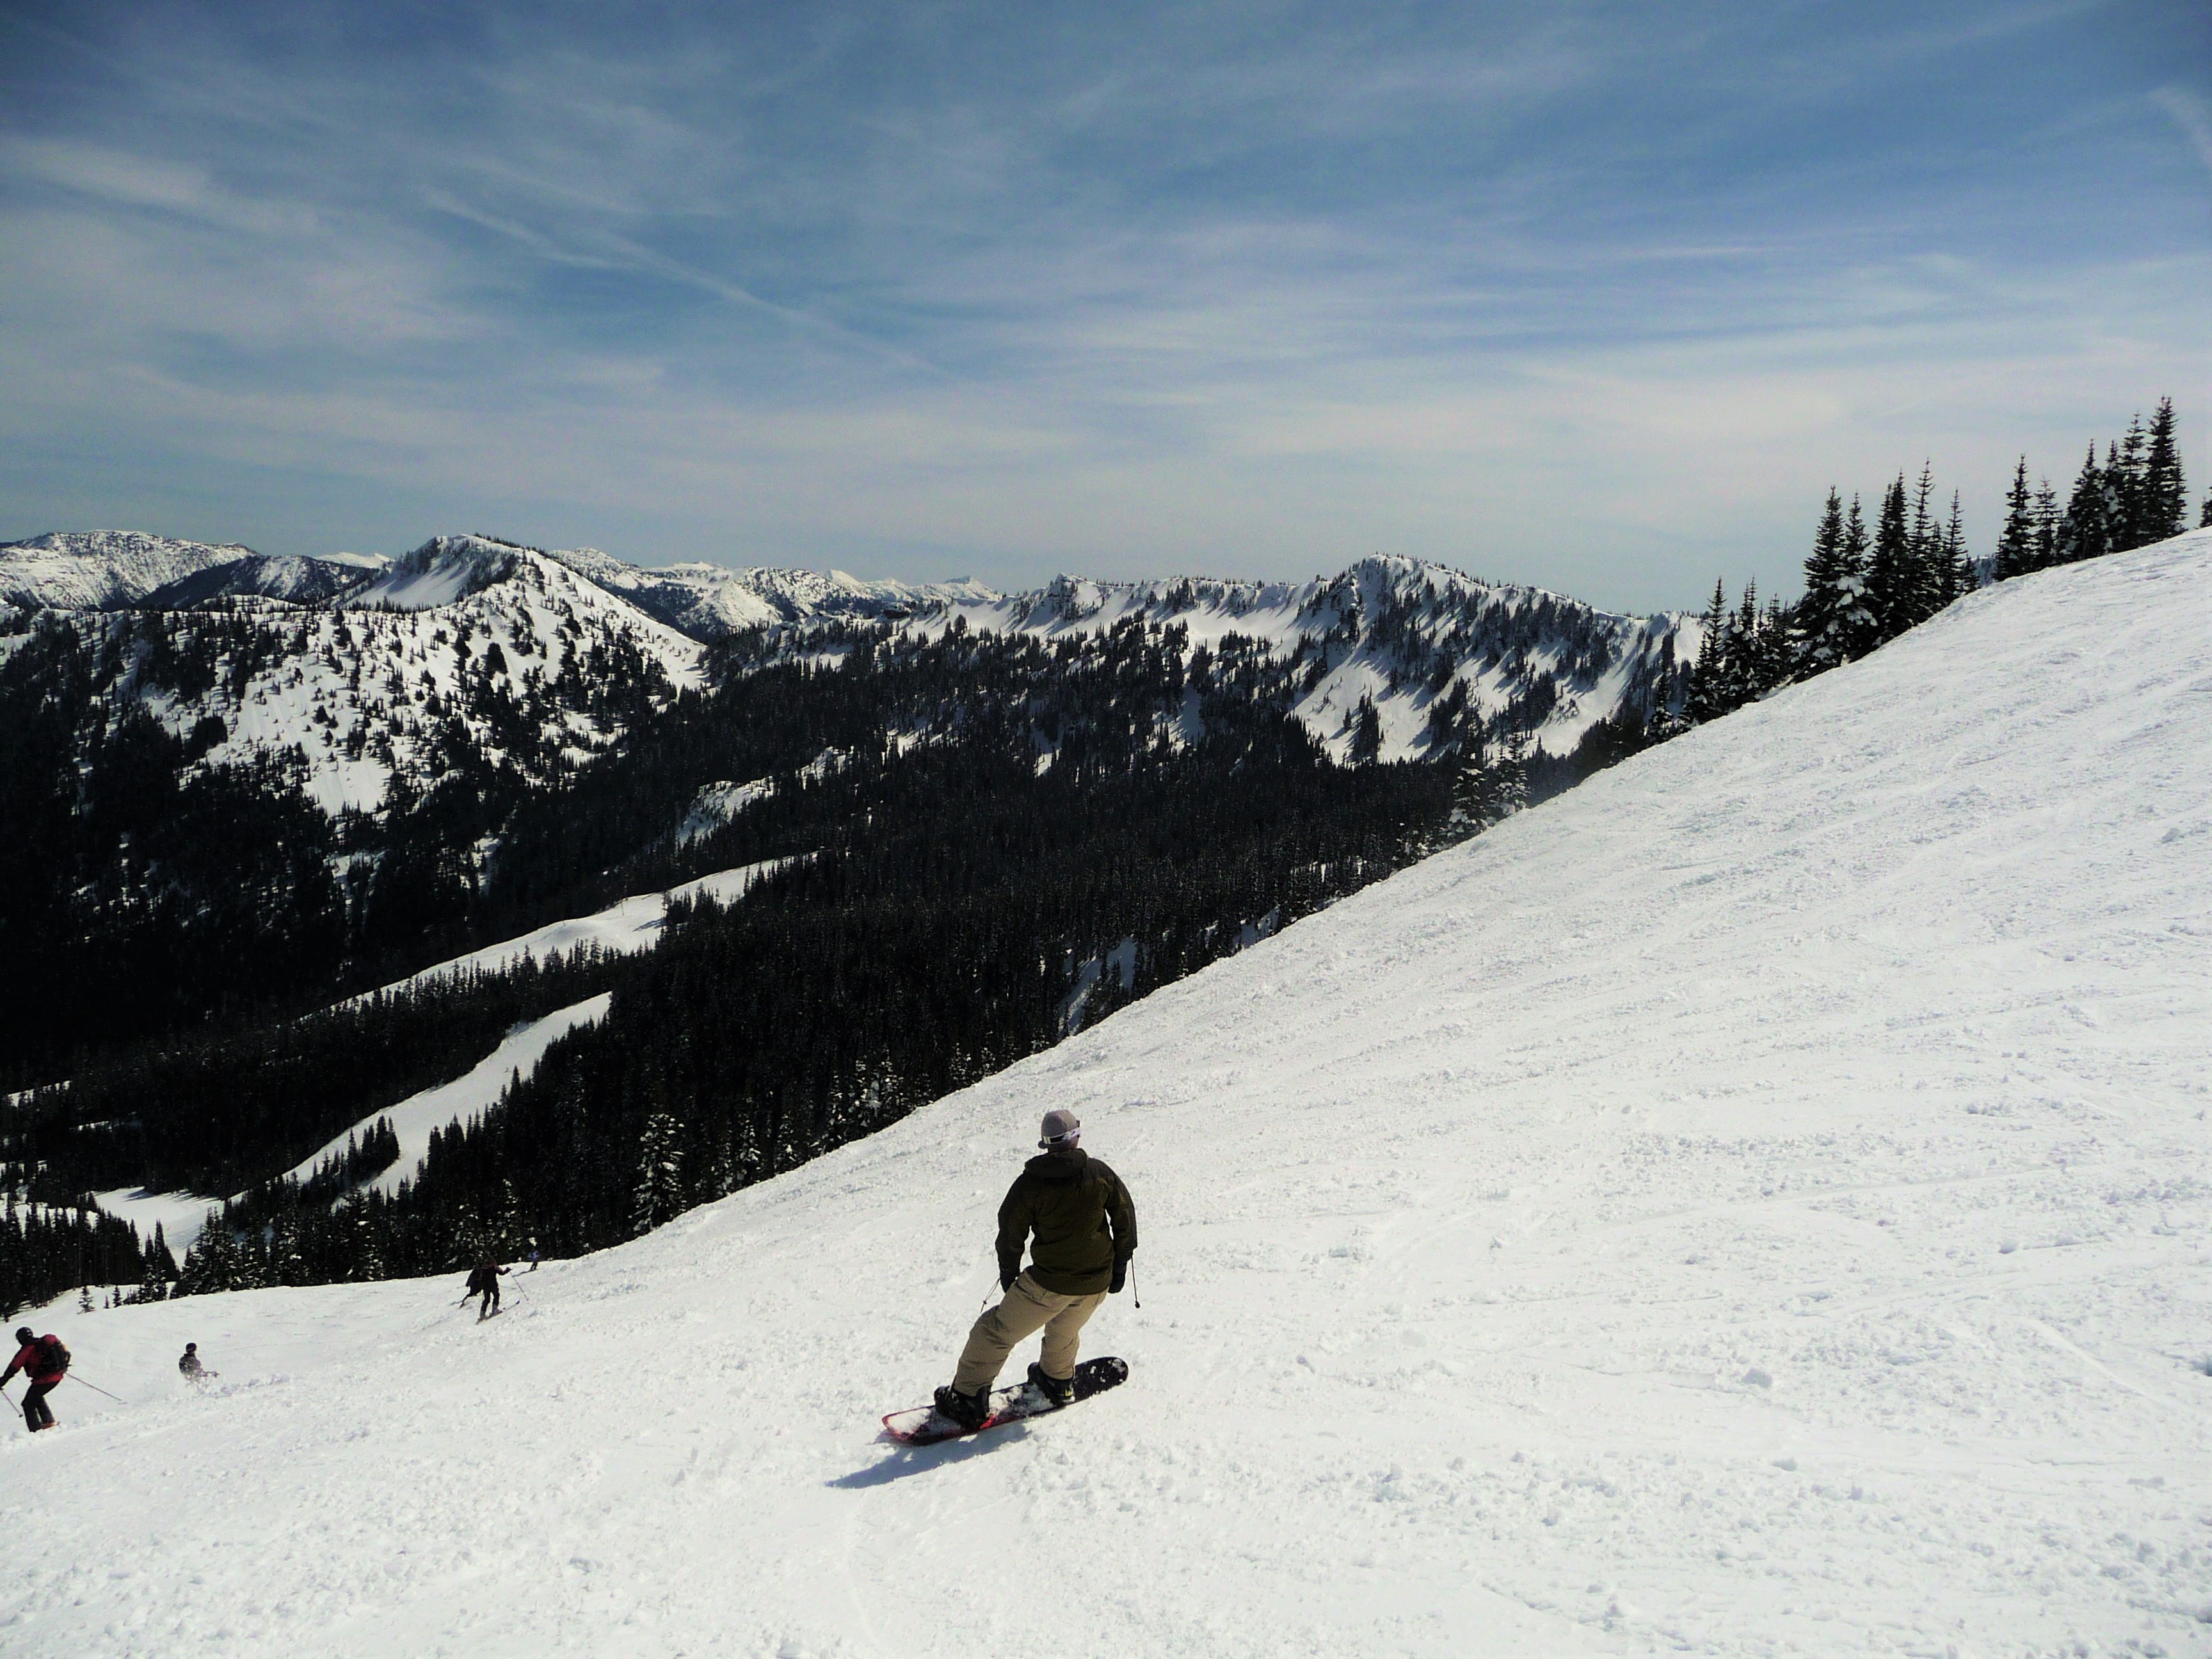 Boarder and Skiers on Crystal Mountain, photo by Matt Zimmerman via Flickr Creative Commons